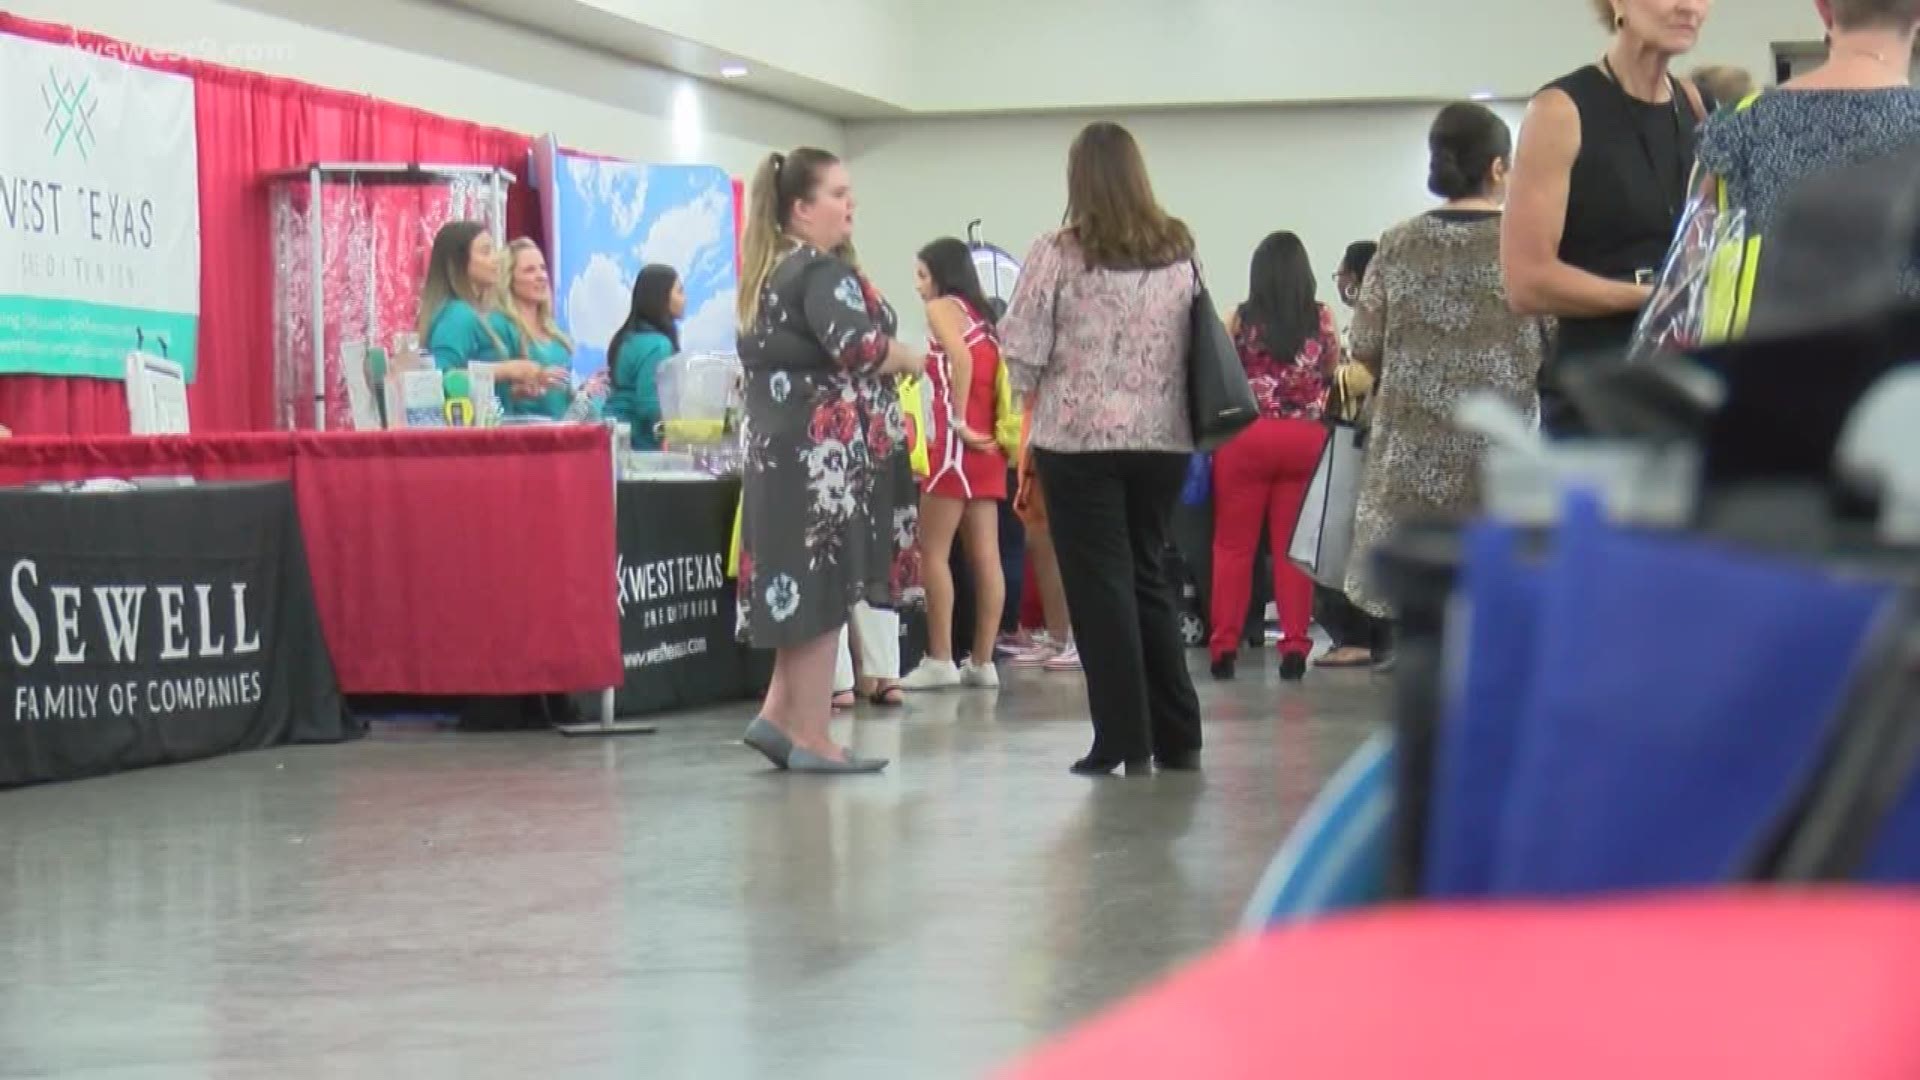 Teachers were able to enjoy a free breakfast while connecting with dozens of businesses and services.